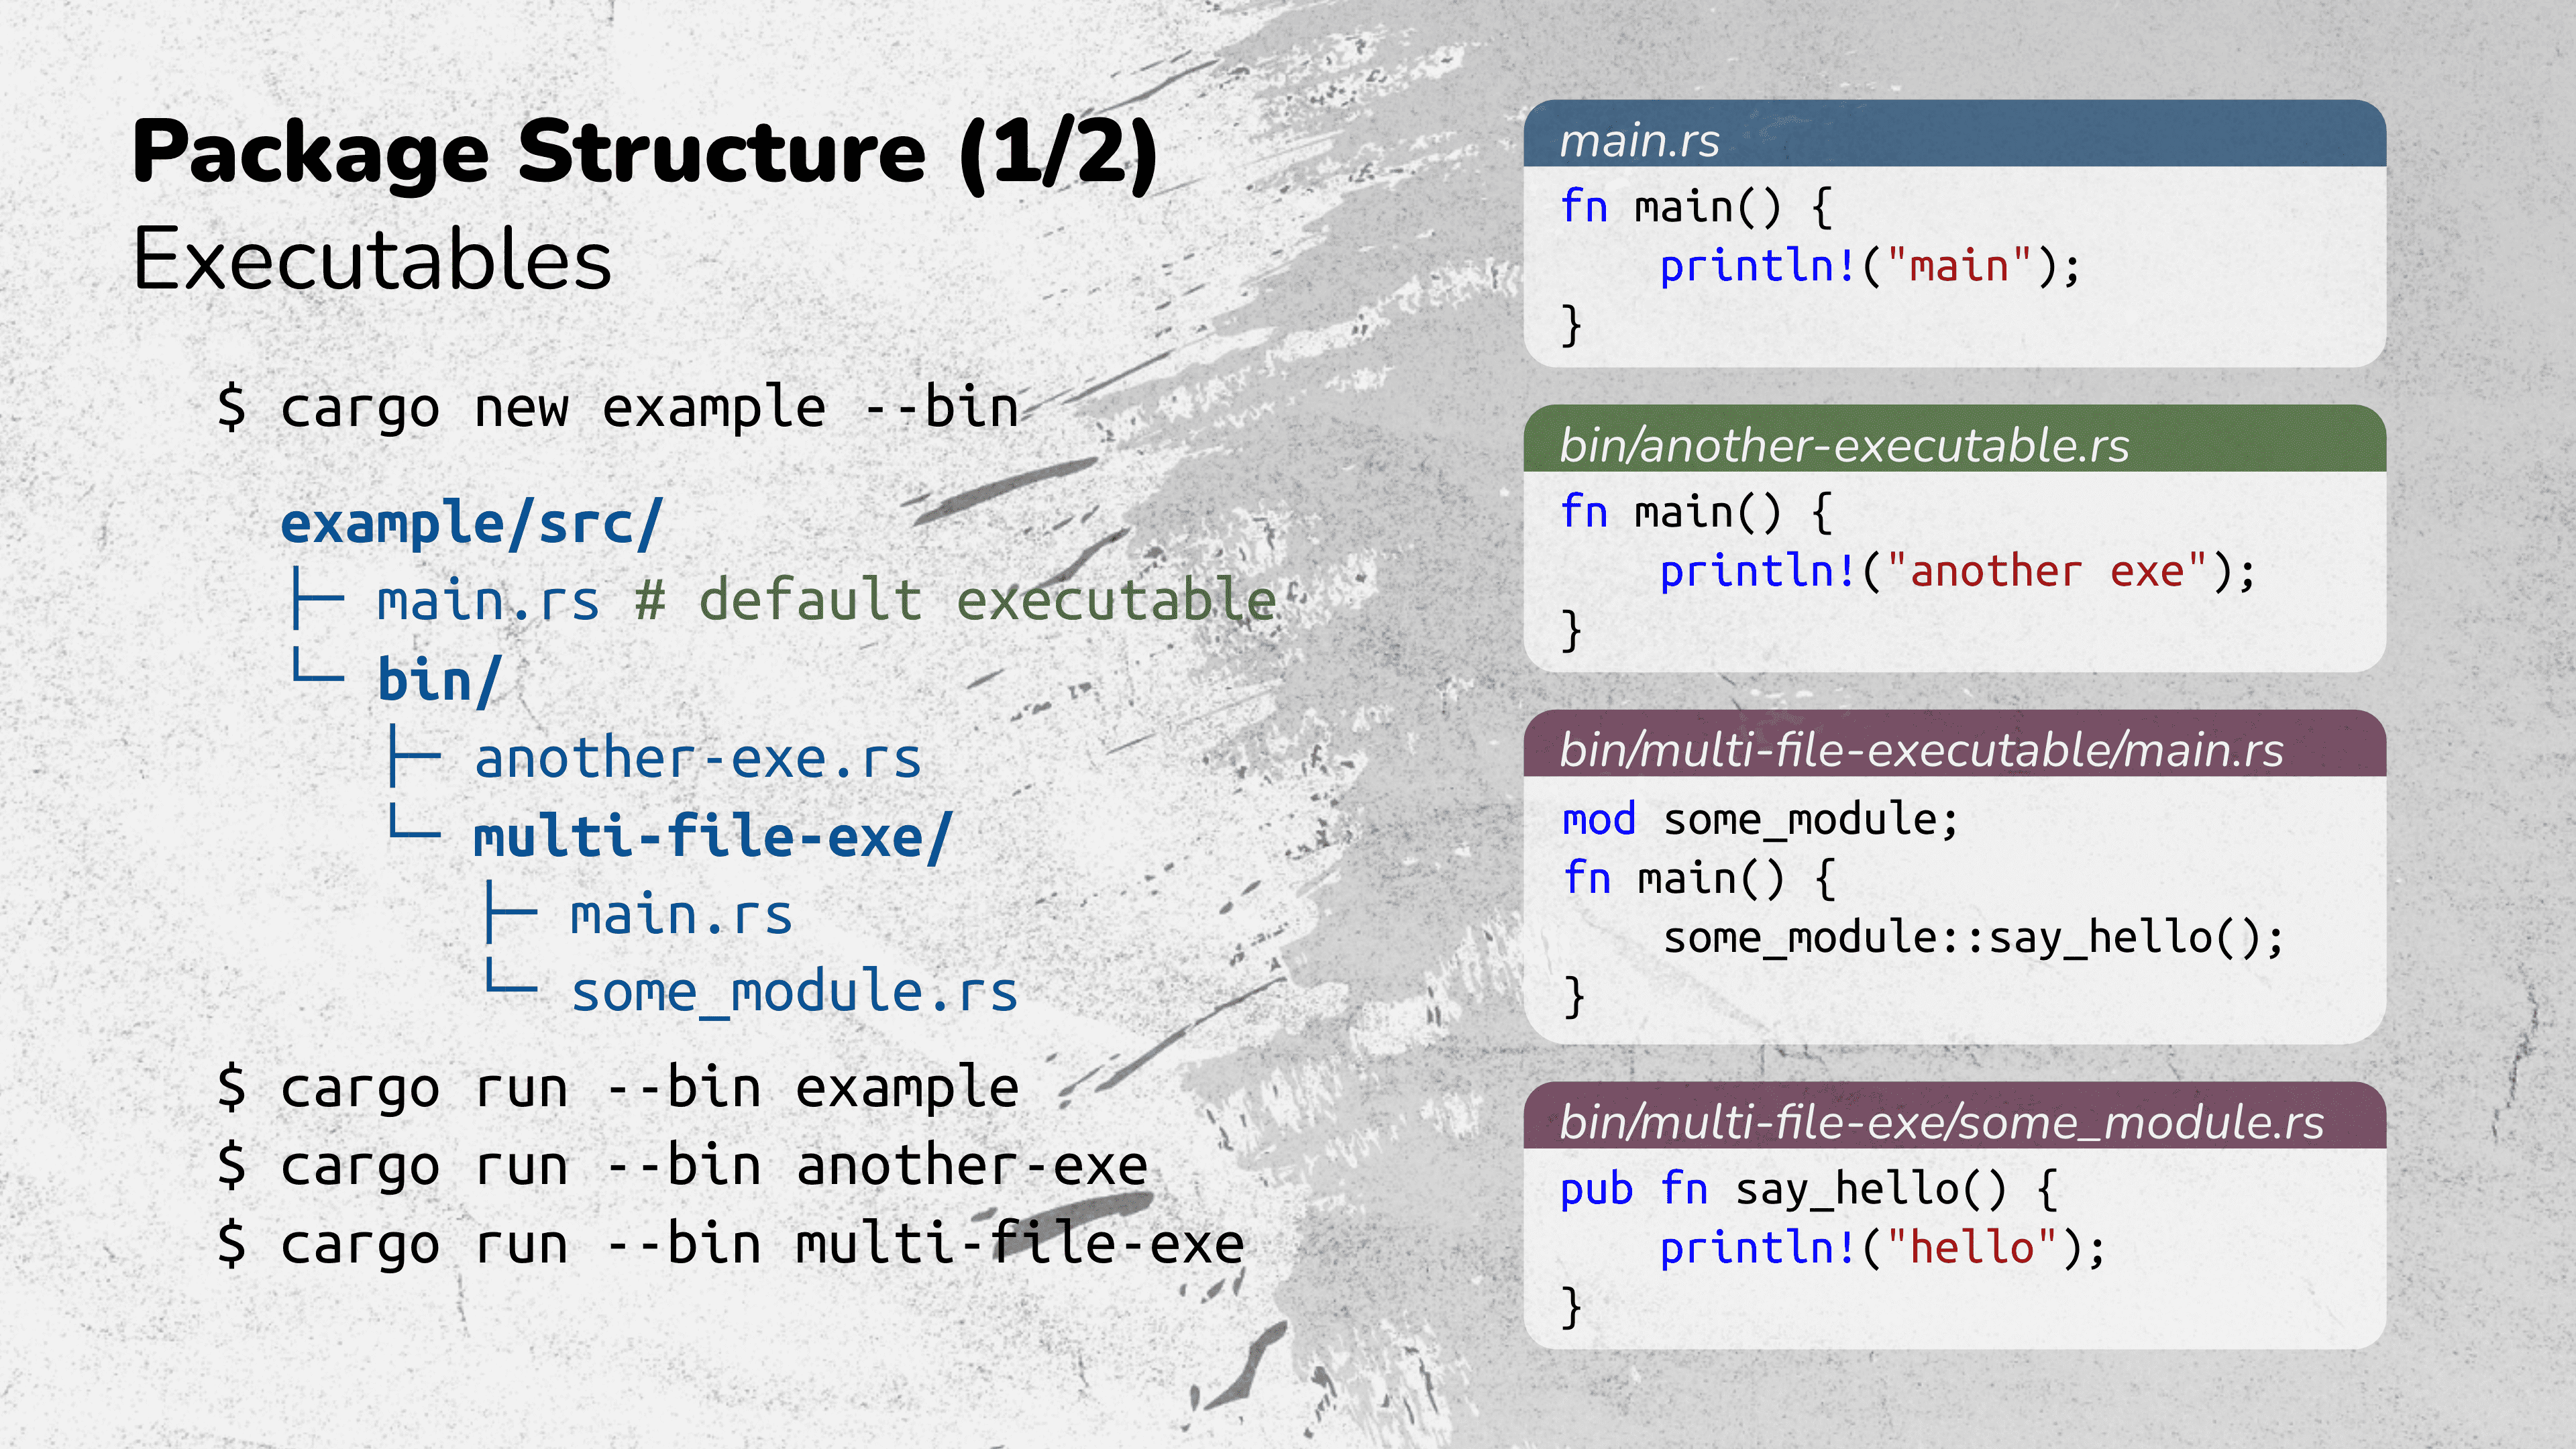 package-structure-executables.png